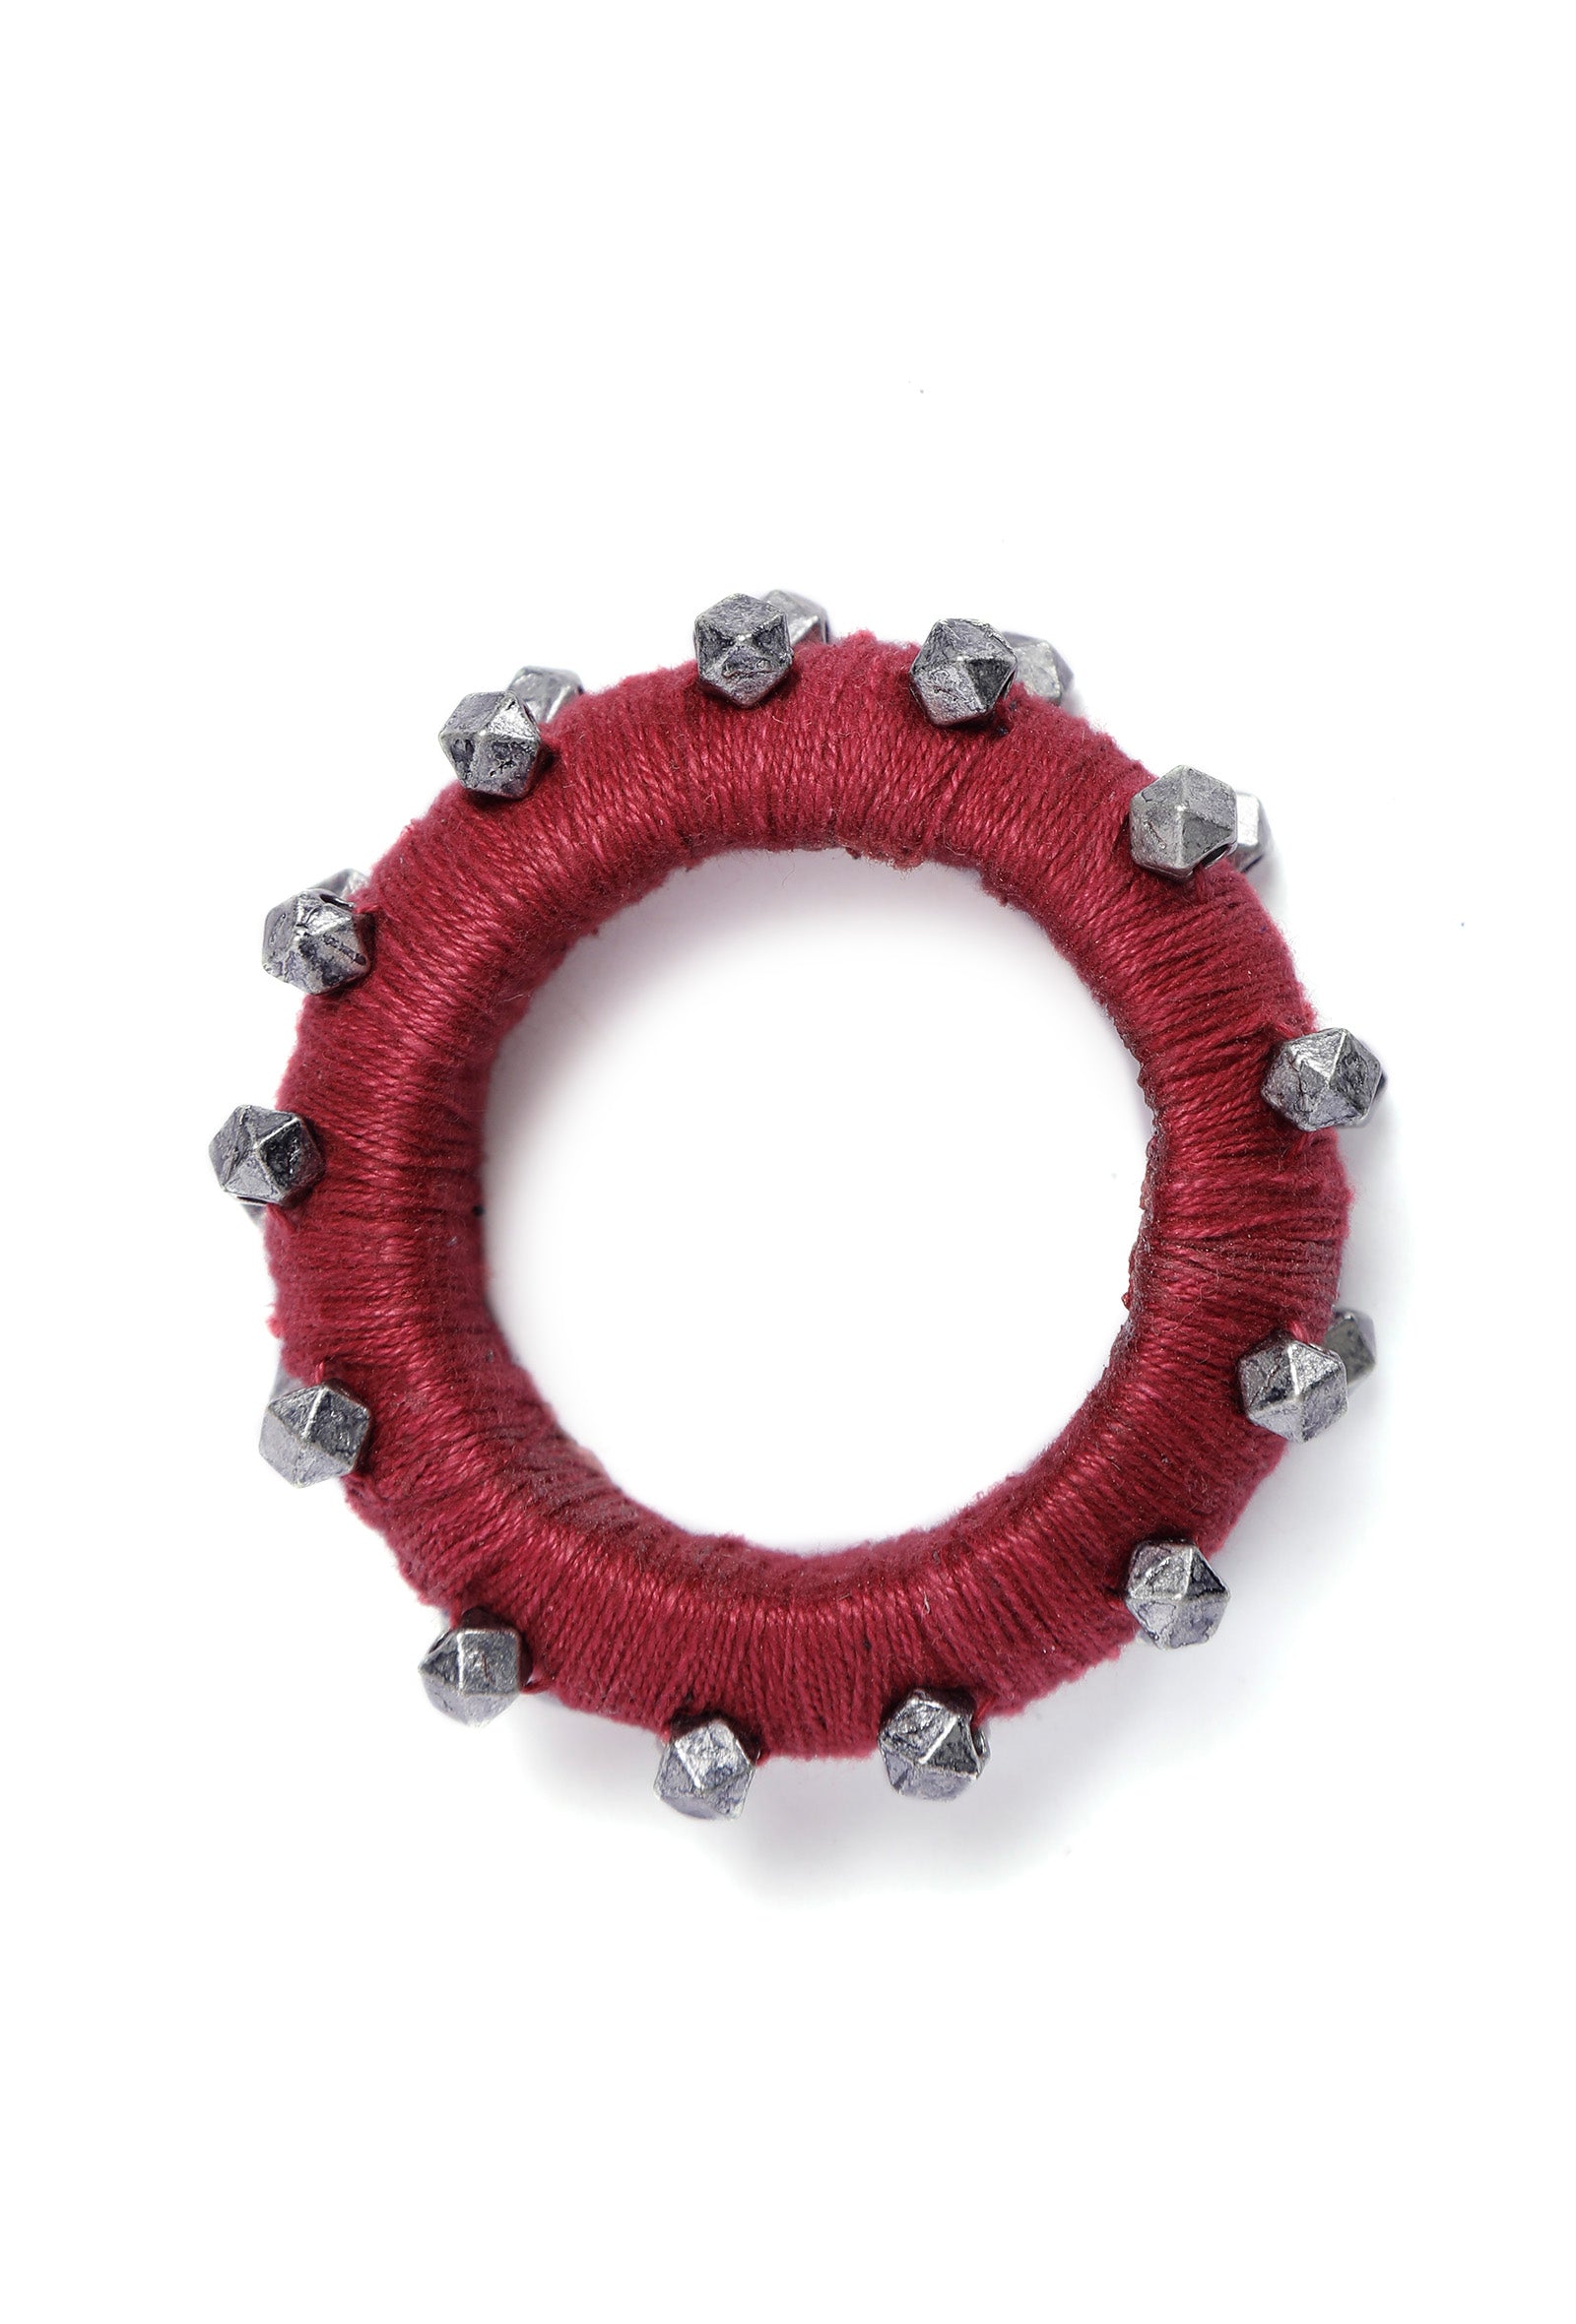 Scarlet Red Thread Wooden Bangles